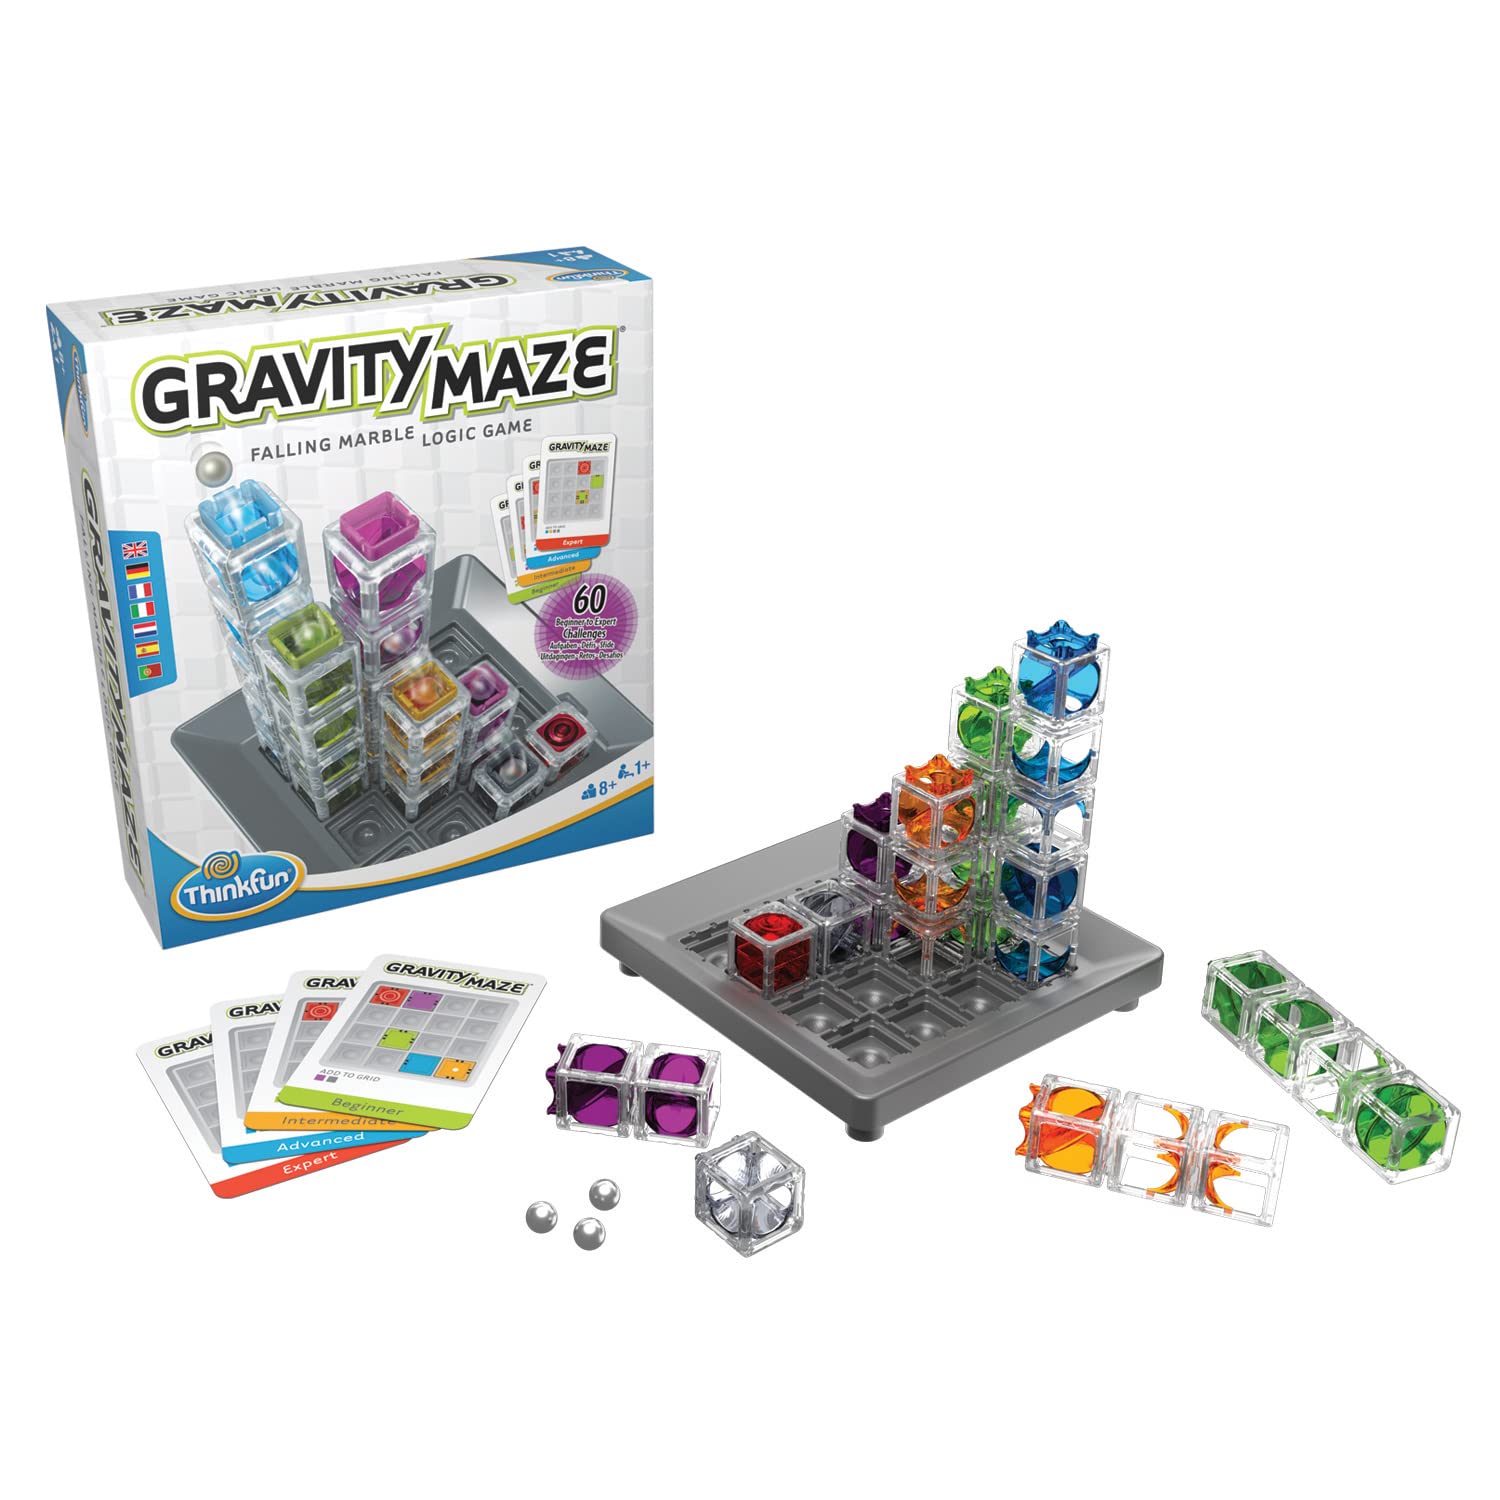 ThinkFun Gravity Maze Falling Marble Challenge Logic Brain Game and STEM Toys for Kids Age 8 Years Up - Gifts